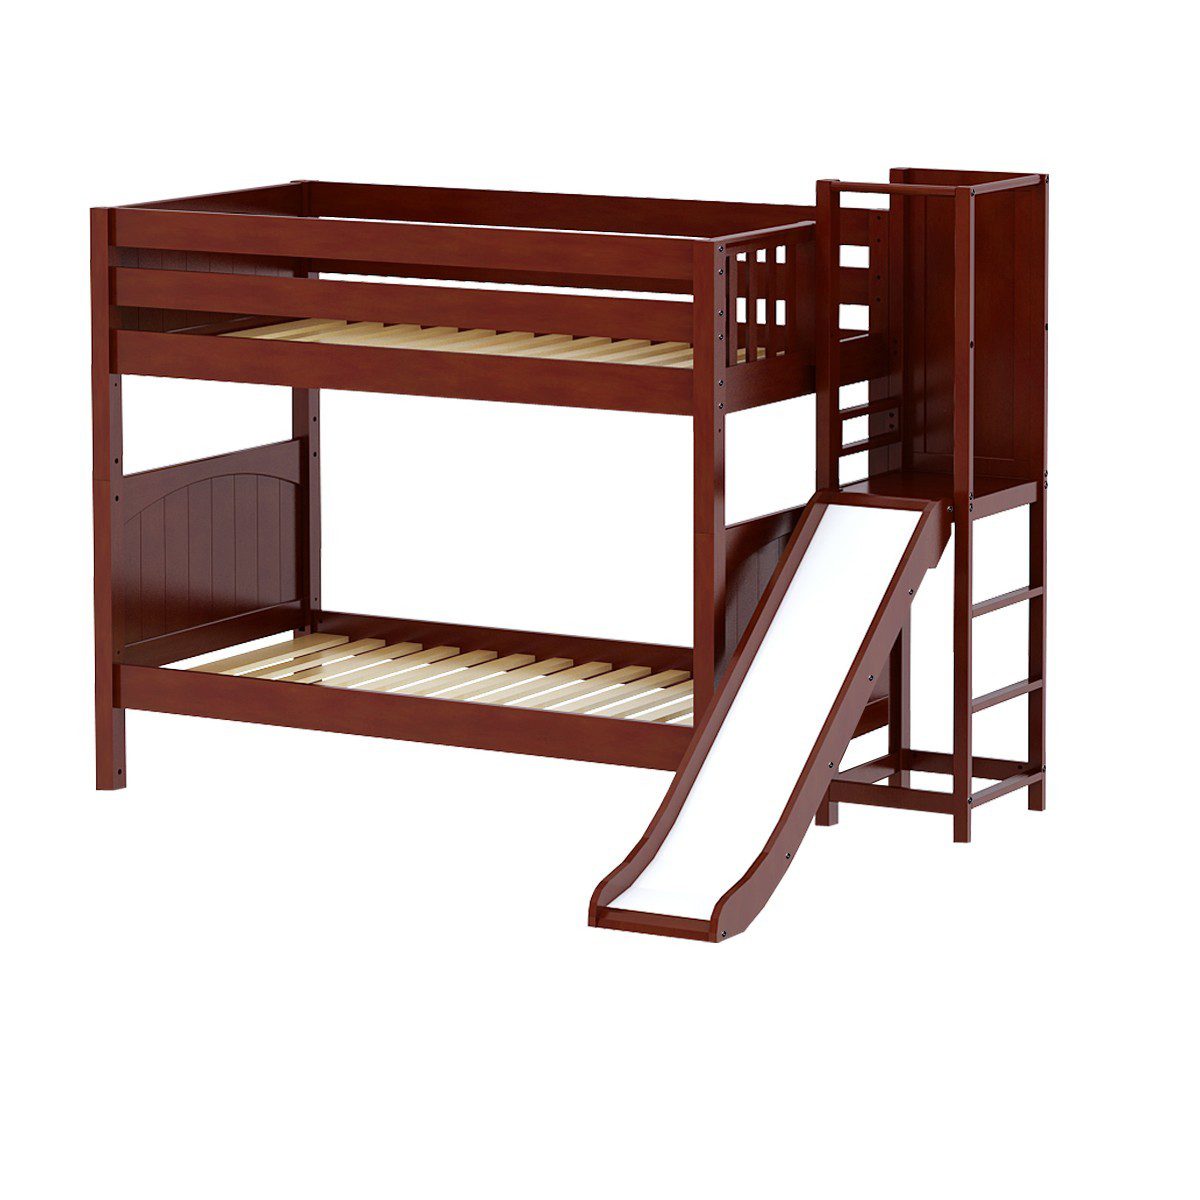 GAP / MEDIUM HEIGHT MAXTRIX TWIN OVER TWIN BUNK BED WITH SLIDE